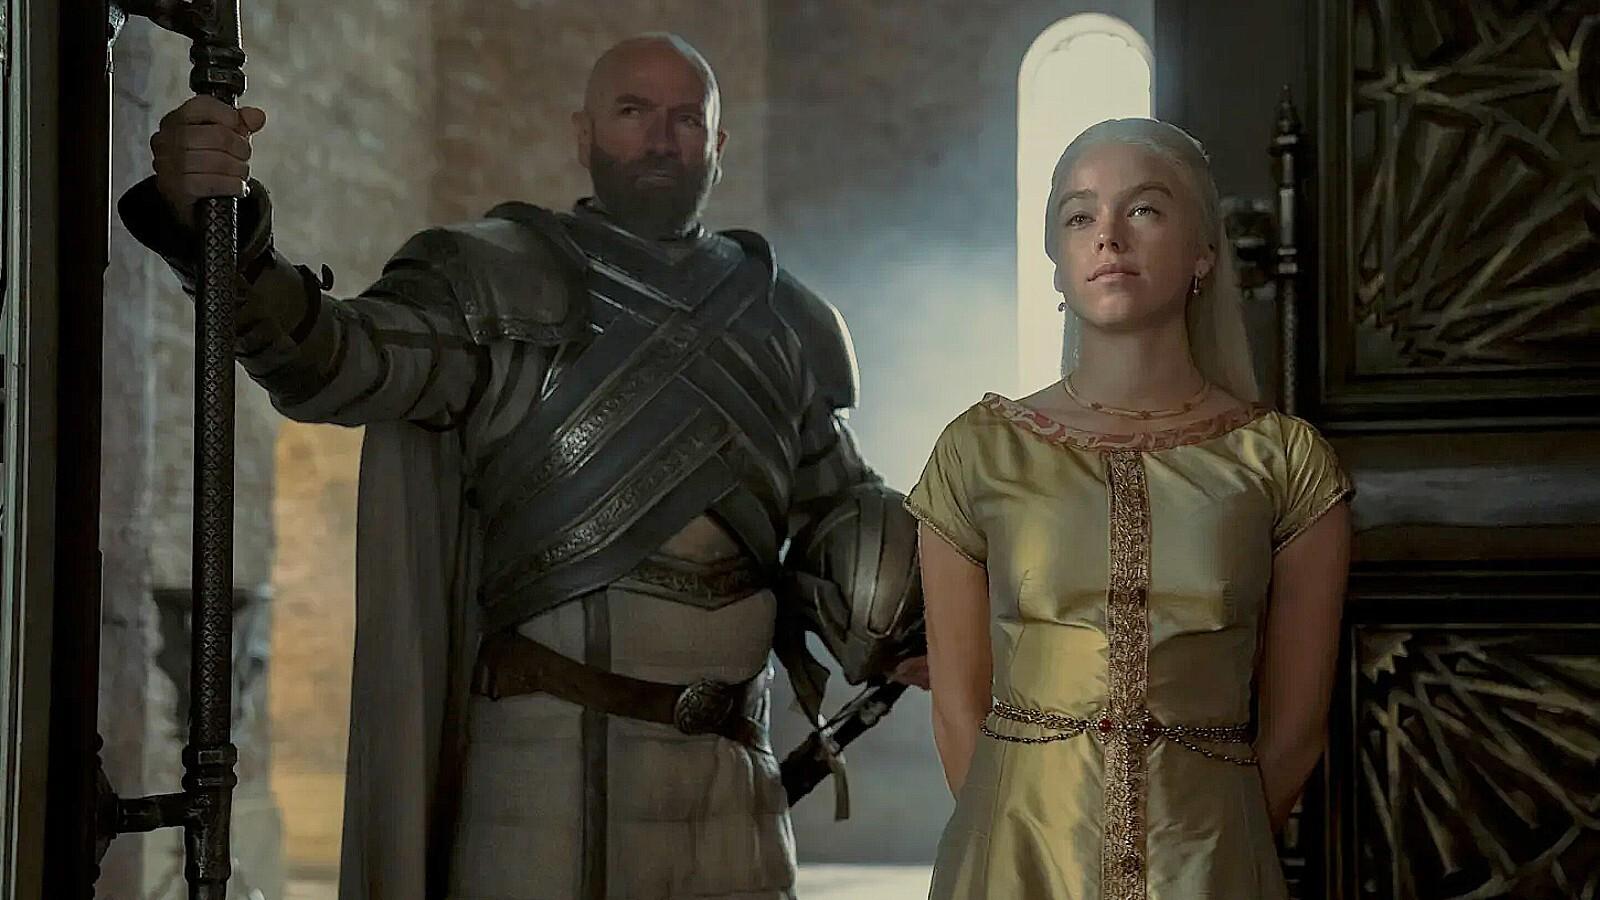 Graham McTavish as Harrold Westerling and Milly Alcock as Princess Rhaenyra in House of the Dragon